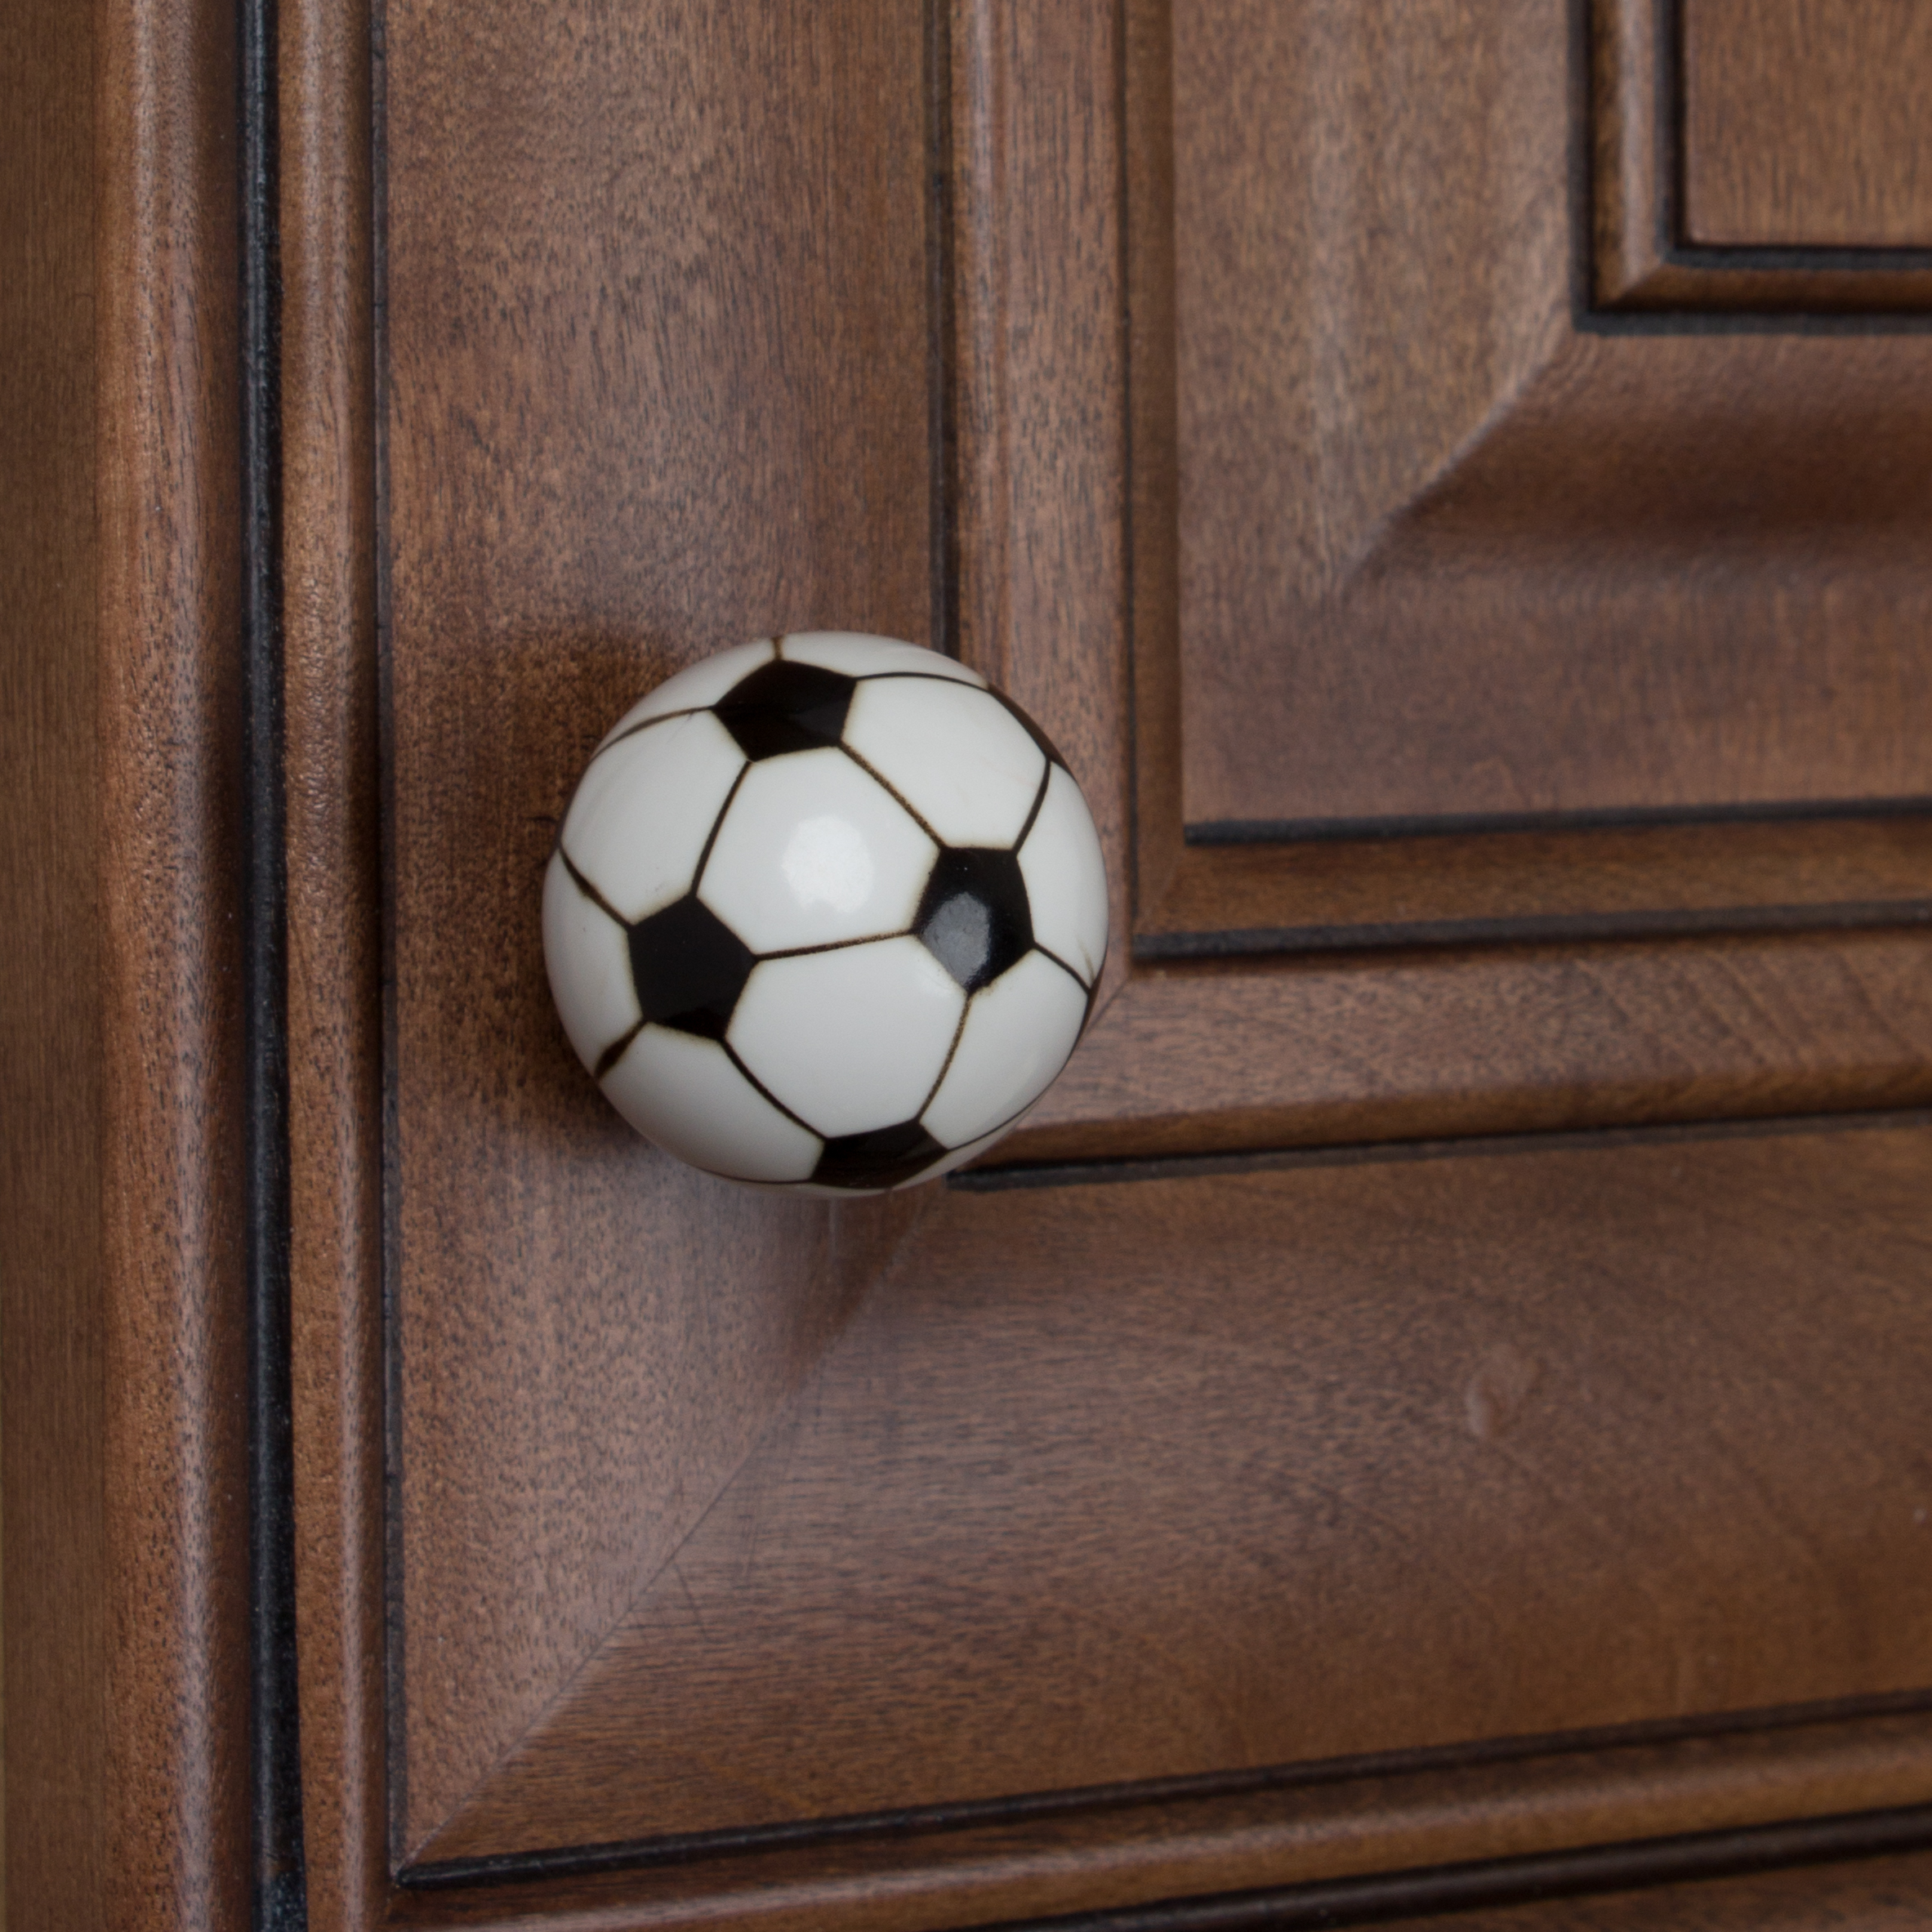 GlideRite 1-1/4 in. Soccer Ball Sports Dresser Drawer Cabinet Knobs, Pack of 5 - image 3 of 4